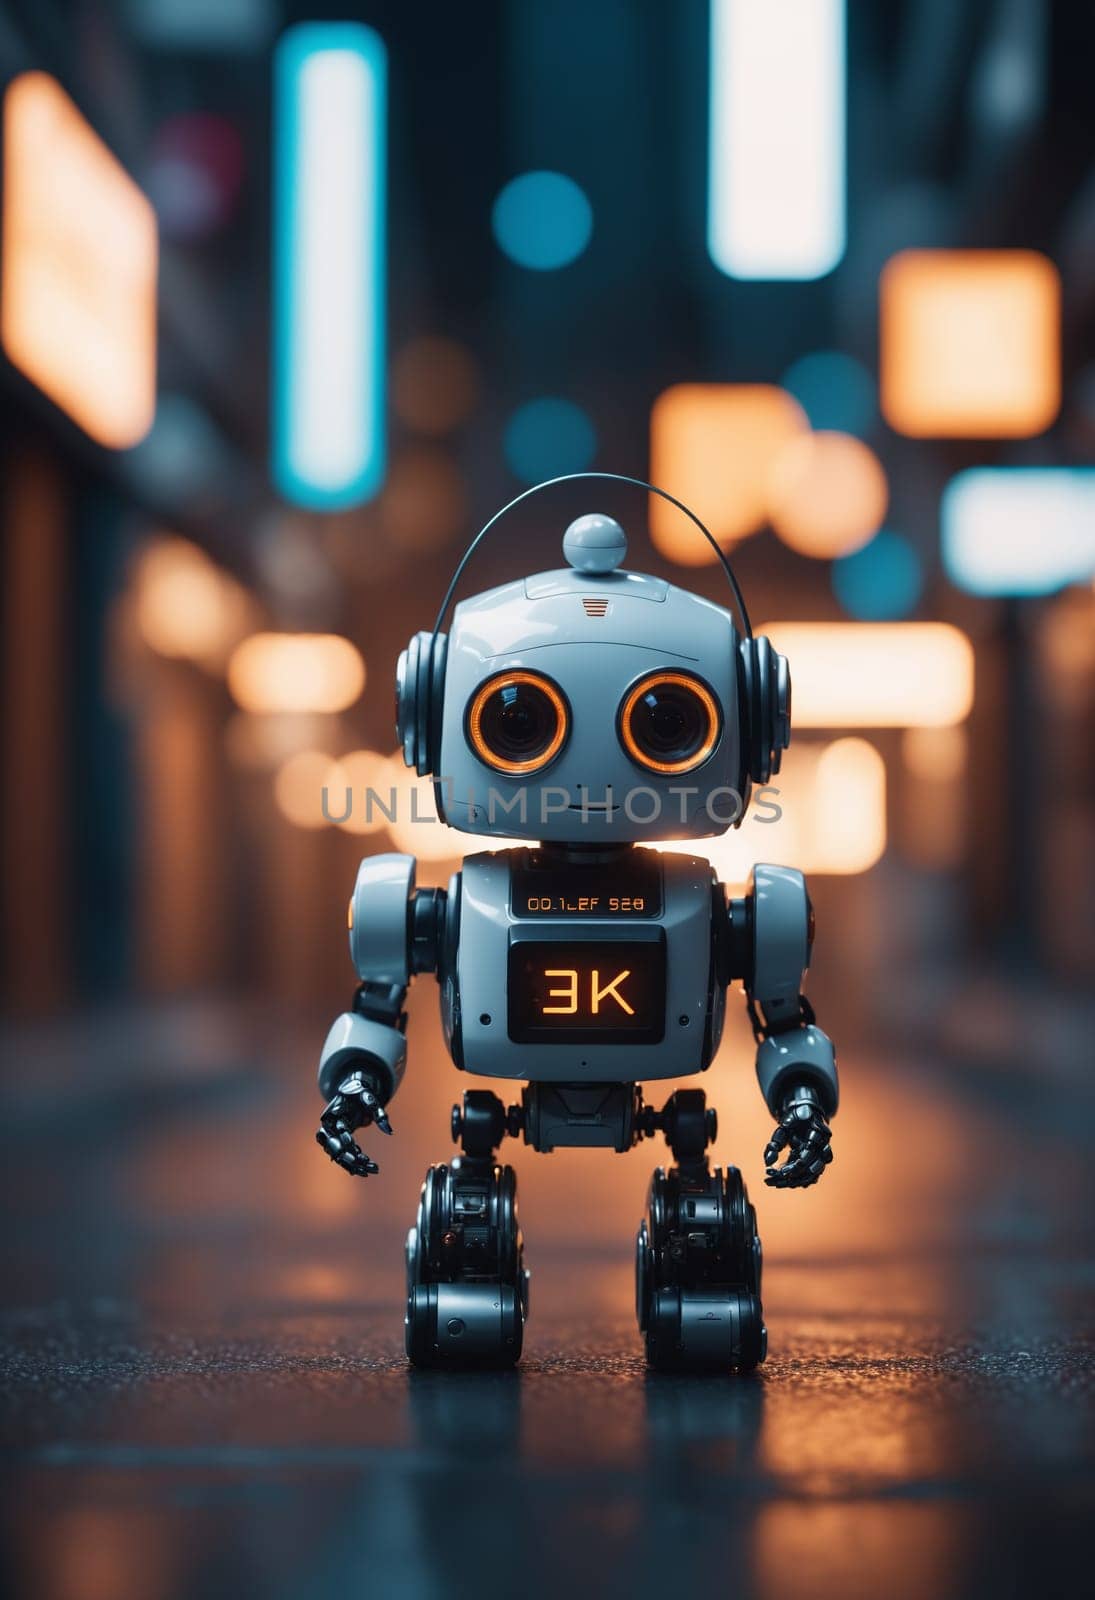 A toy robot wearing personal protective equipment and headphones is strolling down the dark asphalt street. Its electric blue lights shine brightly in the darkness